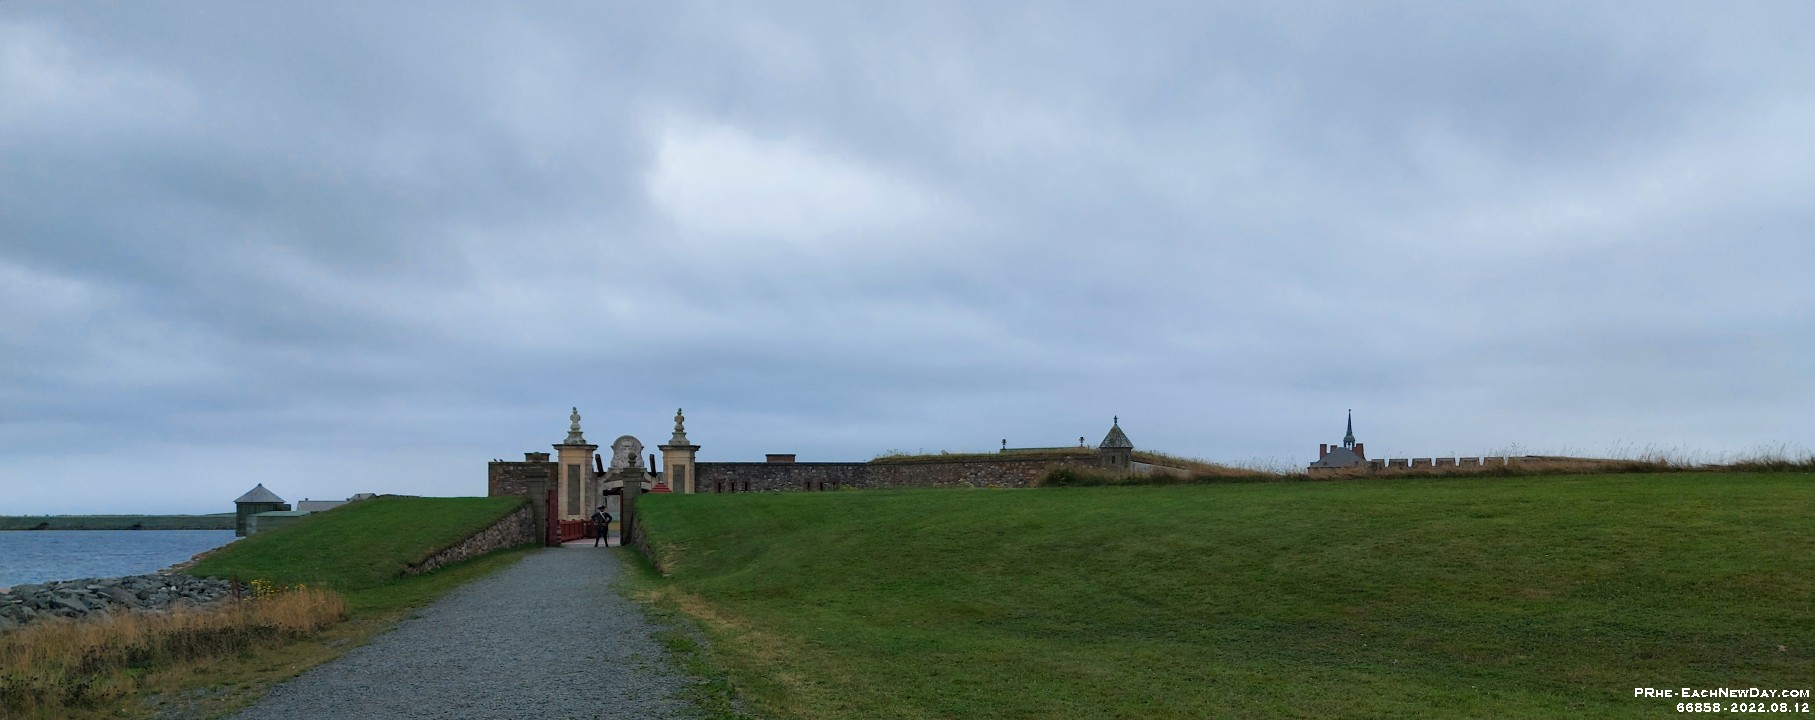 66858RoPeCrRe - At last! We visit the Fortress of Louisbourg, Louisbourg, NS